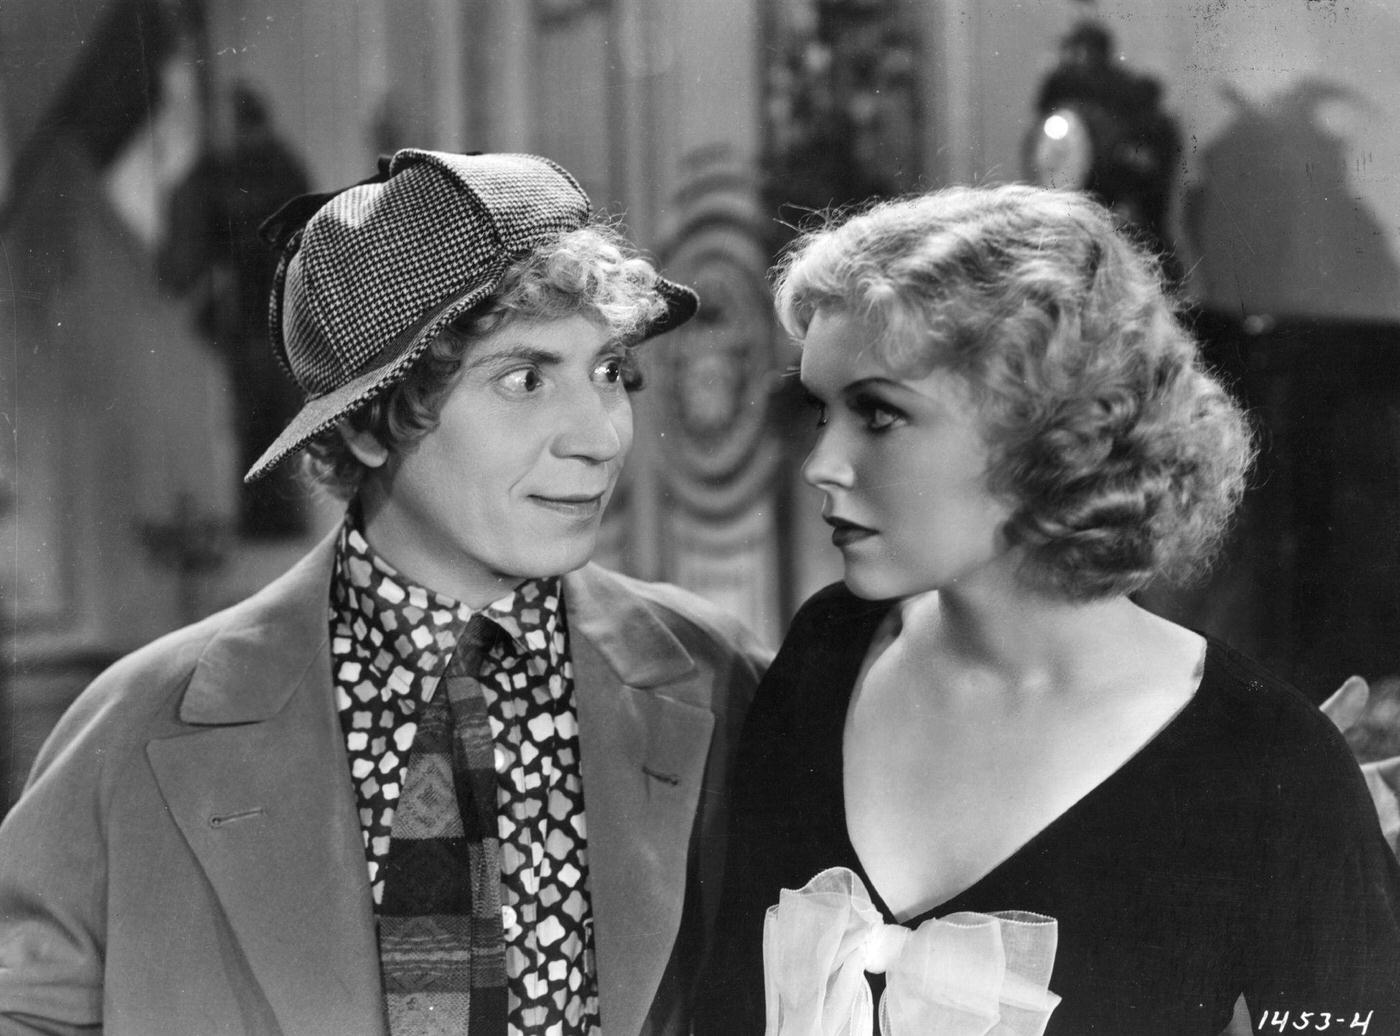 Harpo Marx and Verna Hillie star in Duck Soup (1933).